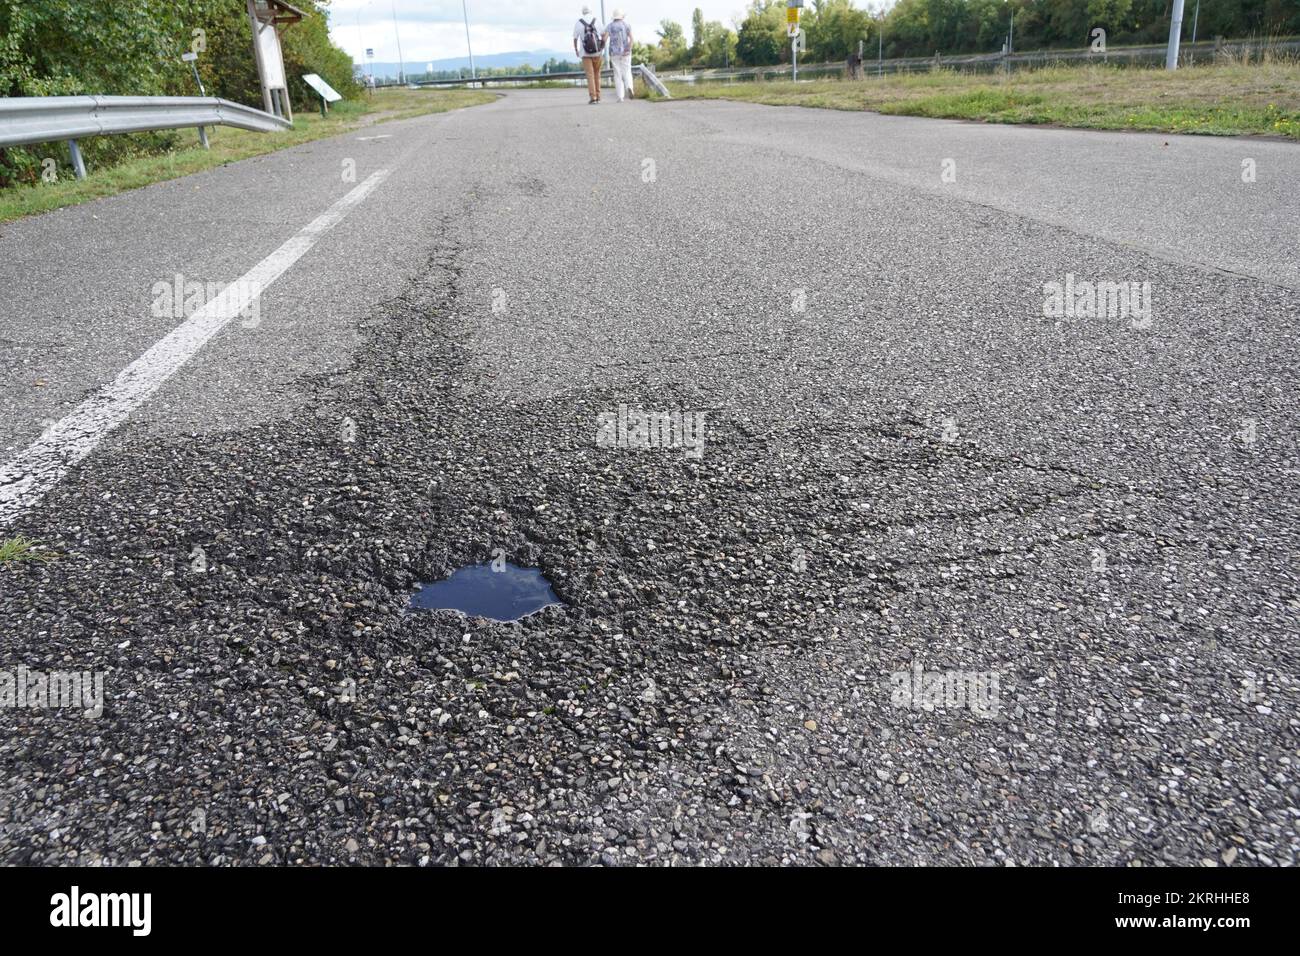 Asphalt road with a small pothole full of rainwater in low angle view. Stock Photo